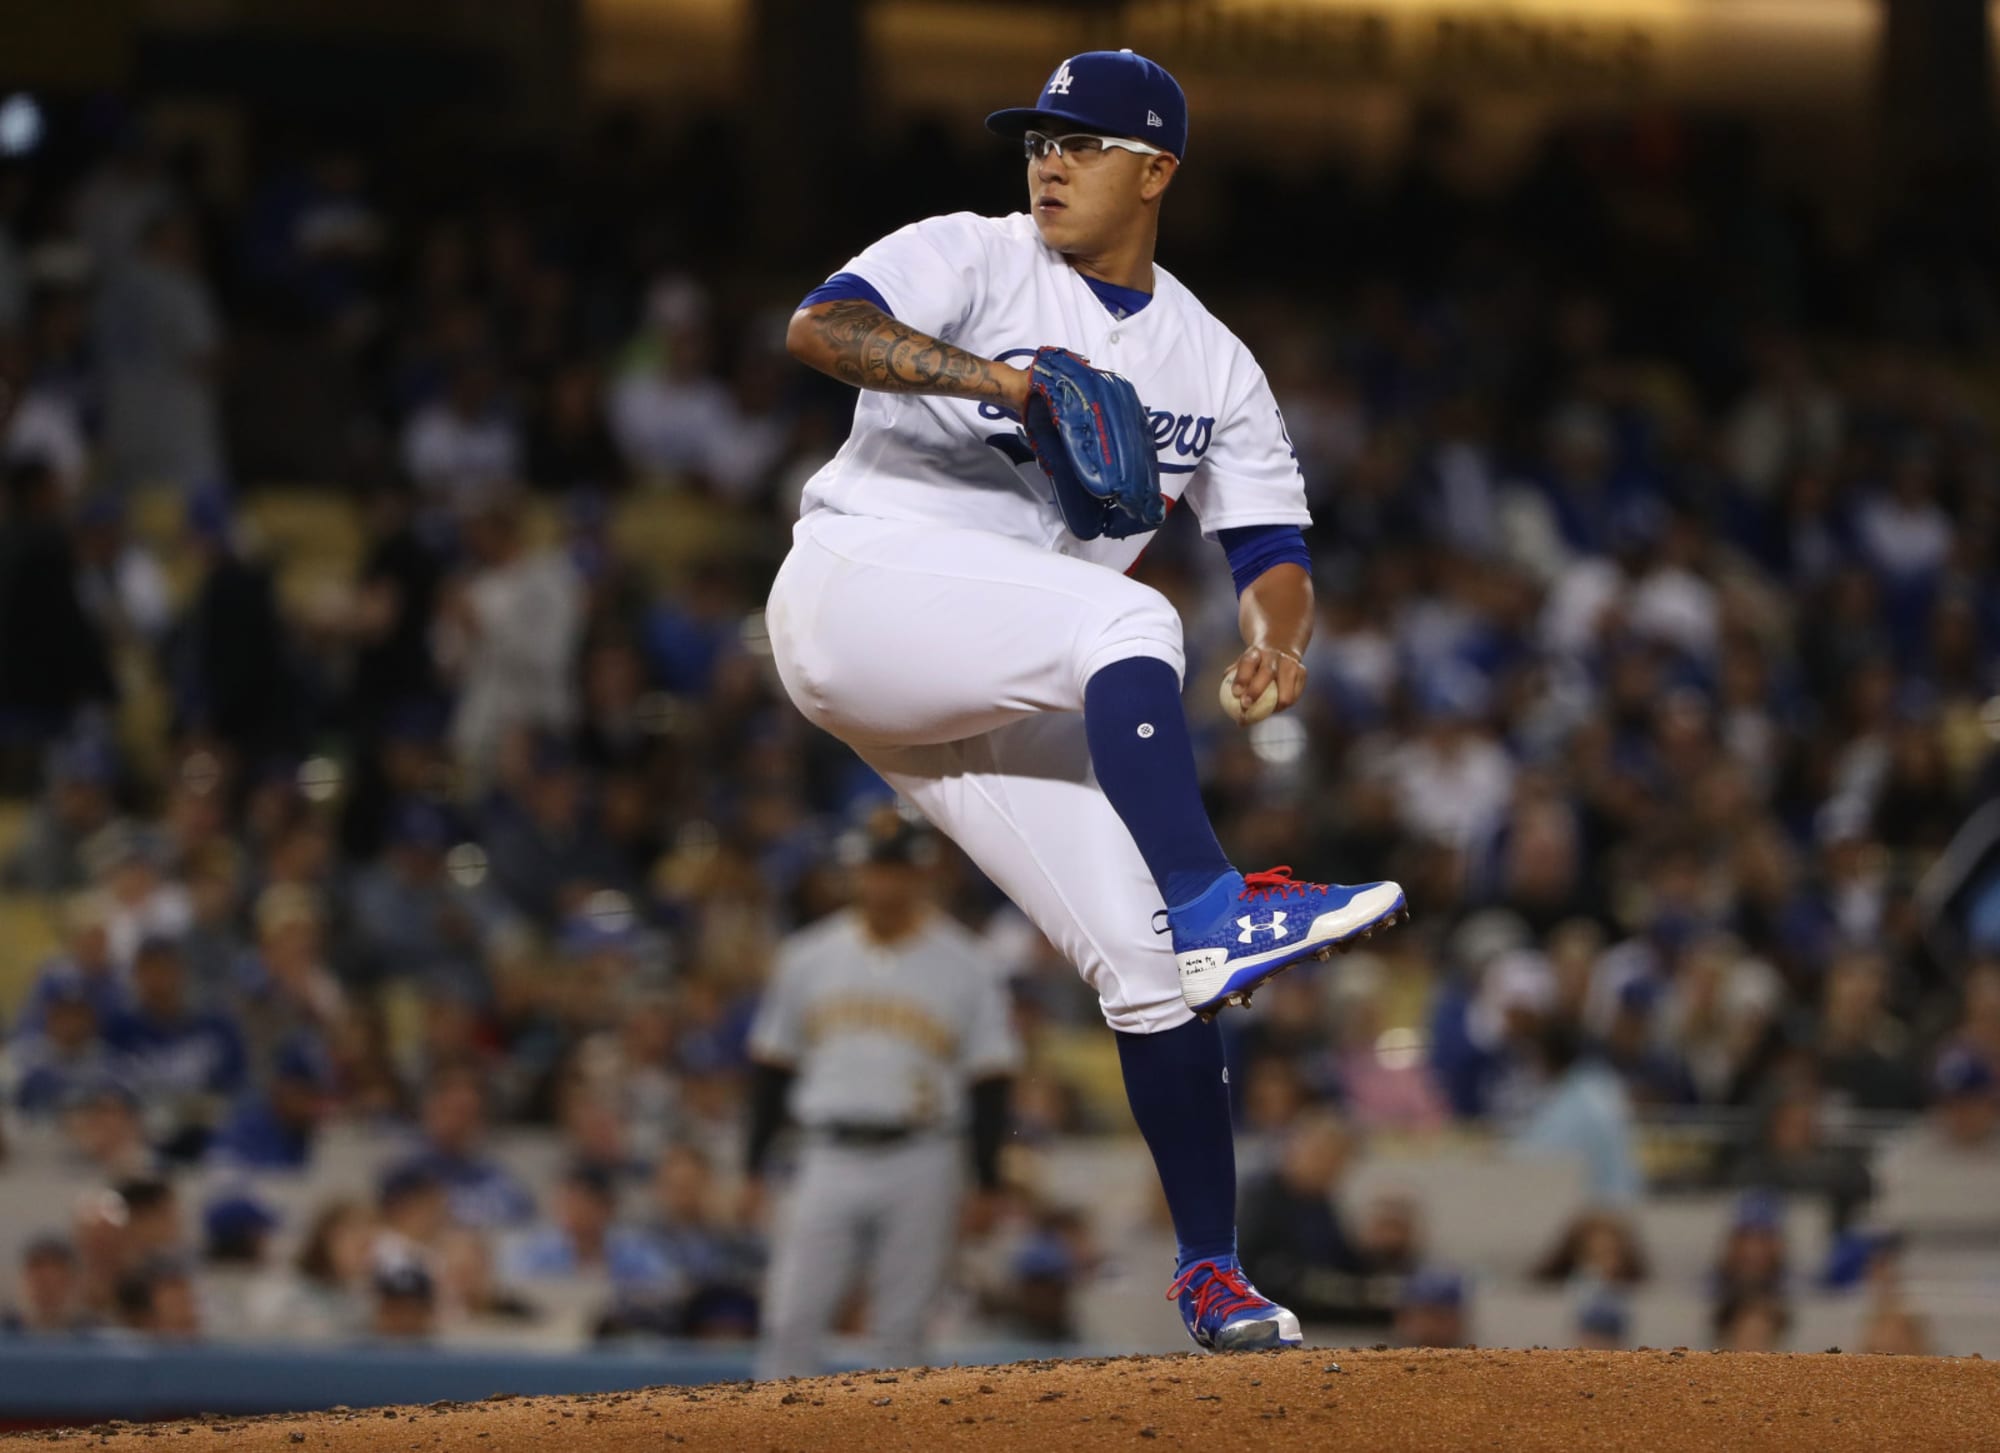 Looking ahead: Julio Urias, 19, gets another shot for Dodgers